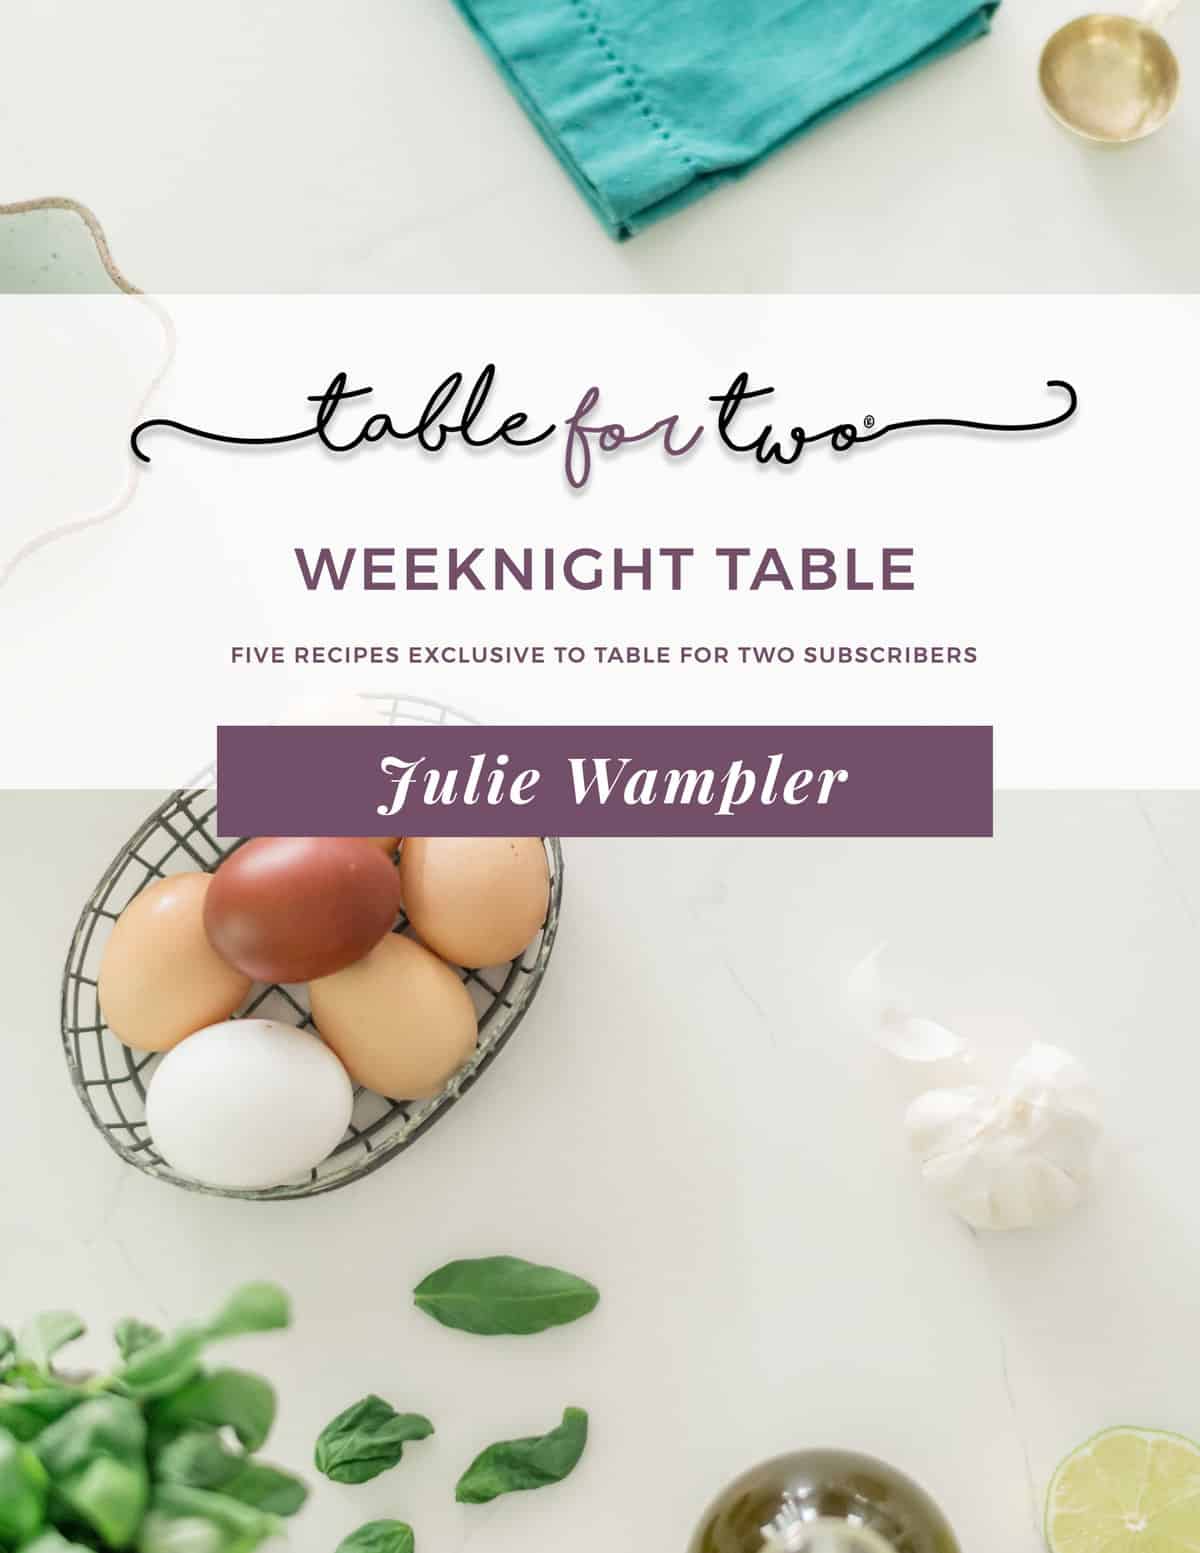 The Weeknight Table E-Cookbook by Julie Wampler